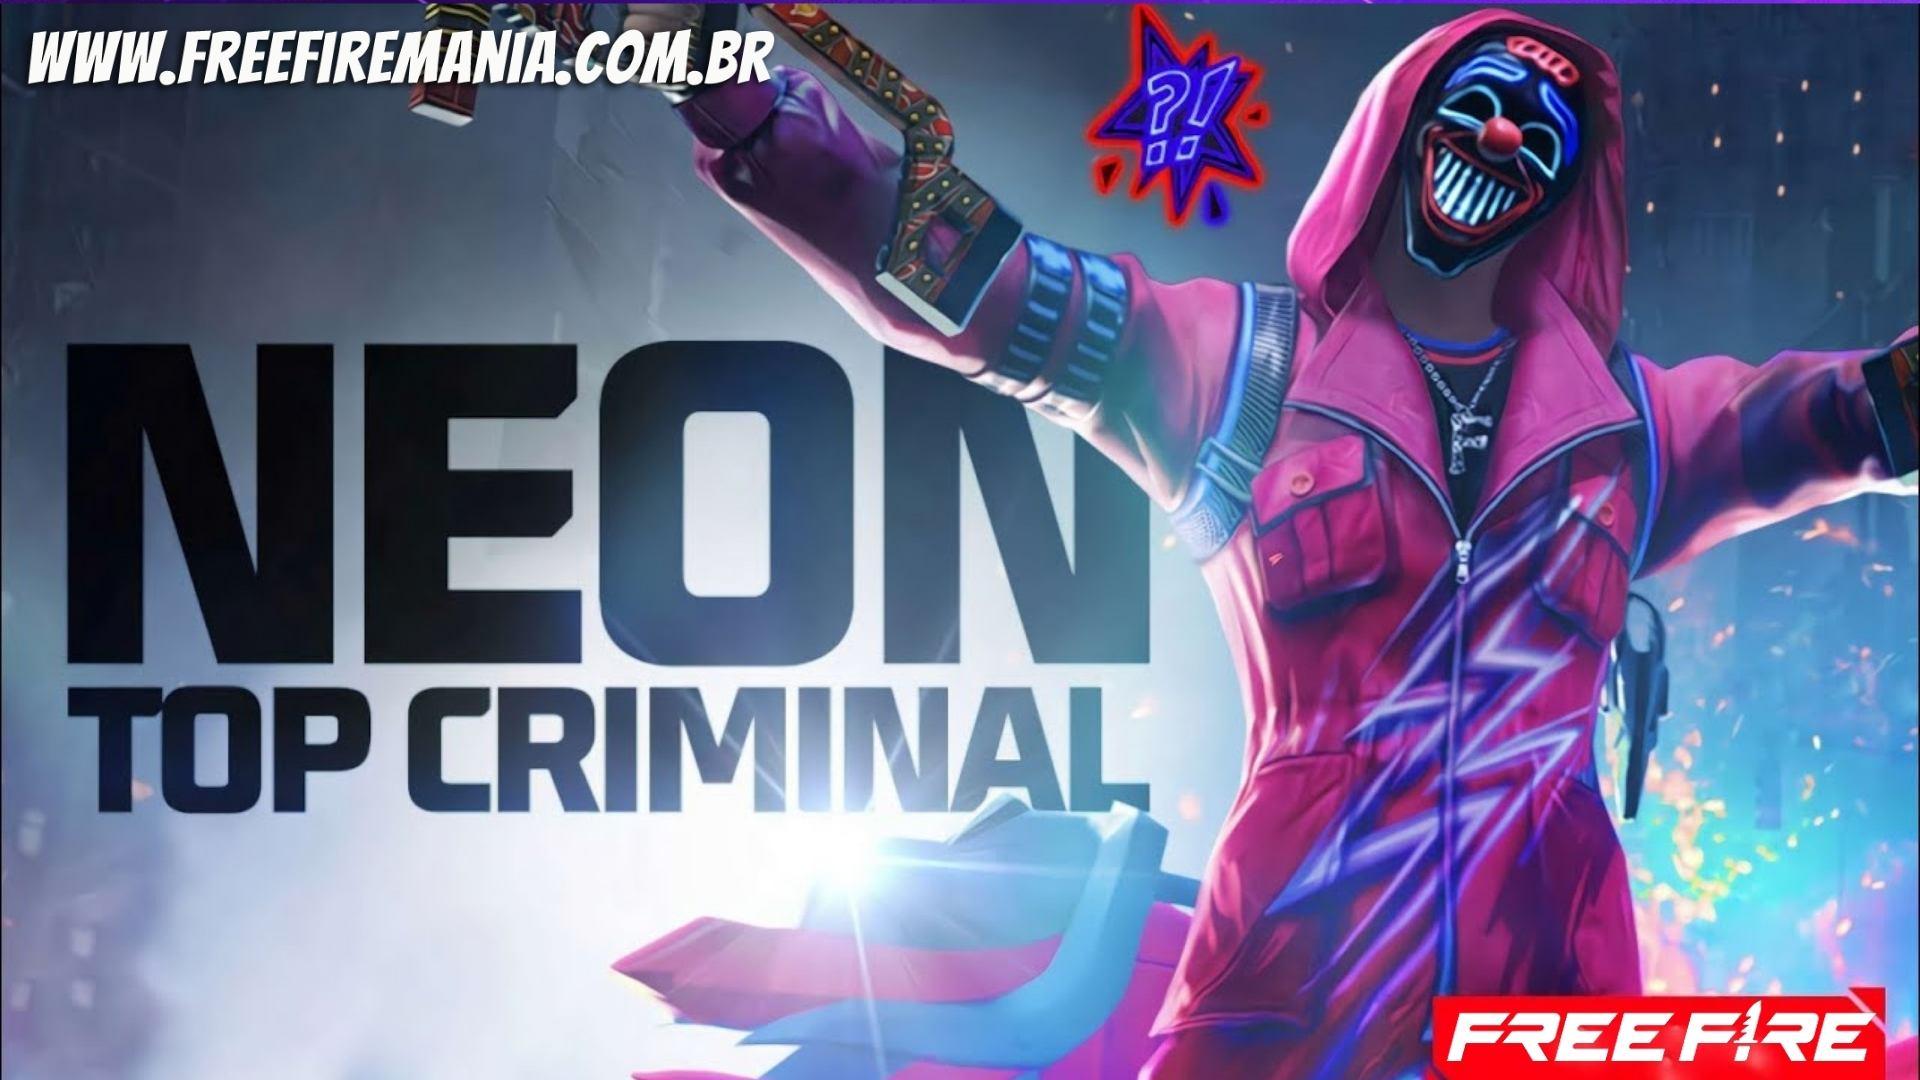 Top Criminal Neon no Free Fire: release date, special effects and more from Top Frifas